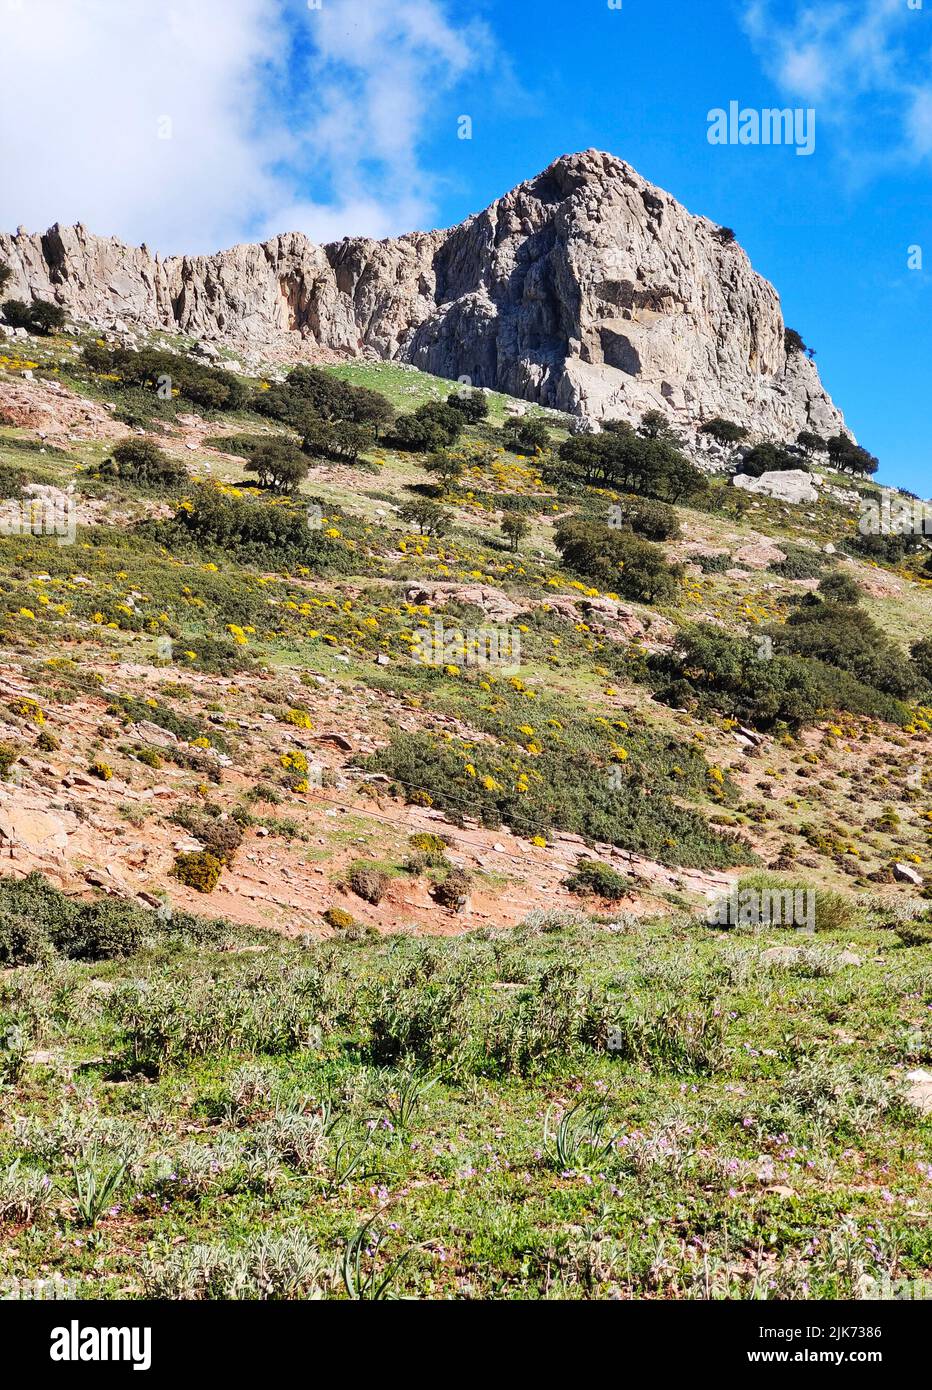 Mountains in Malaga province in the south of Spain in a sunny day Stock Photo